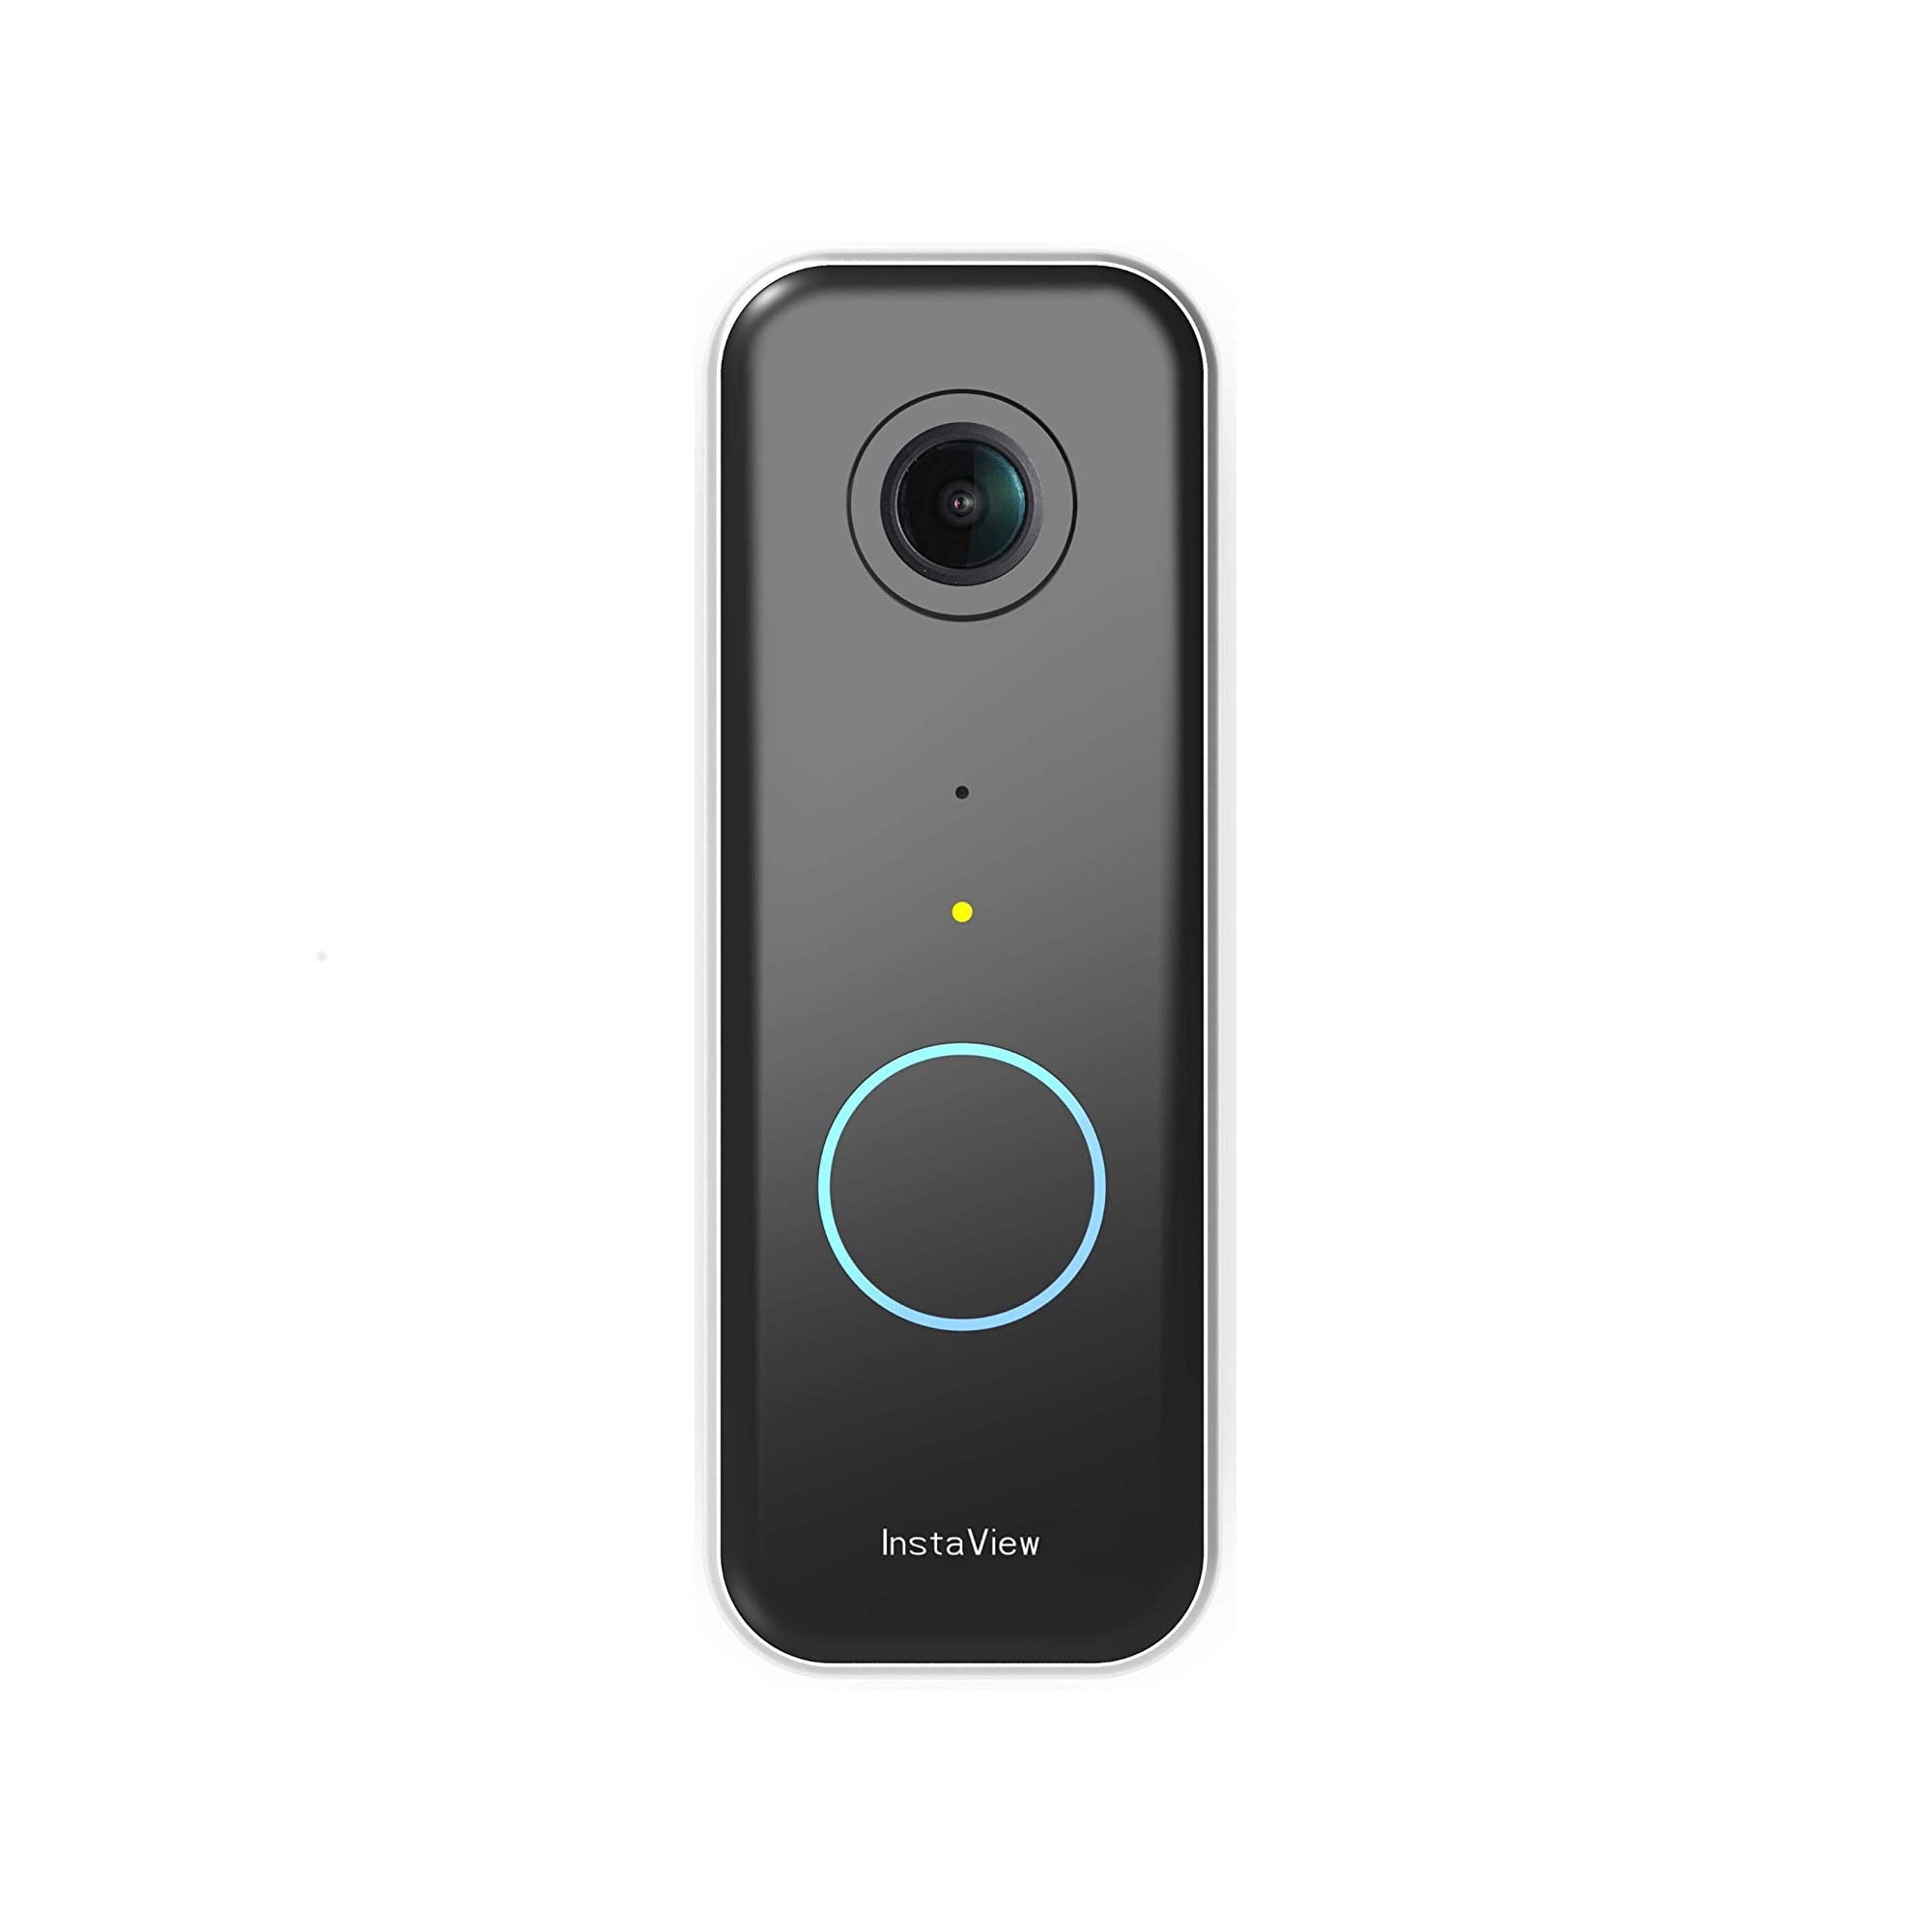 What is the smallest doorbell camera?